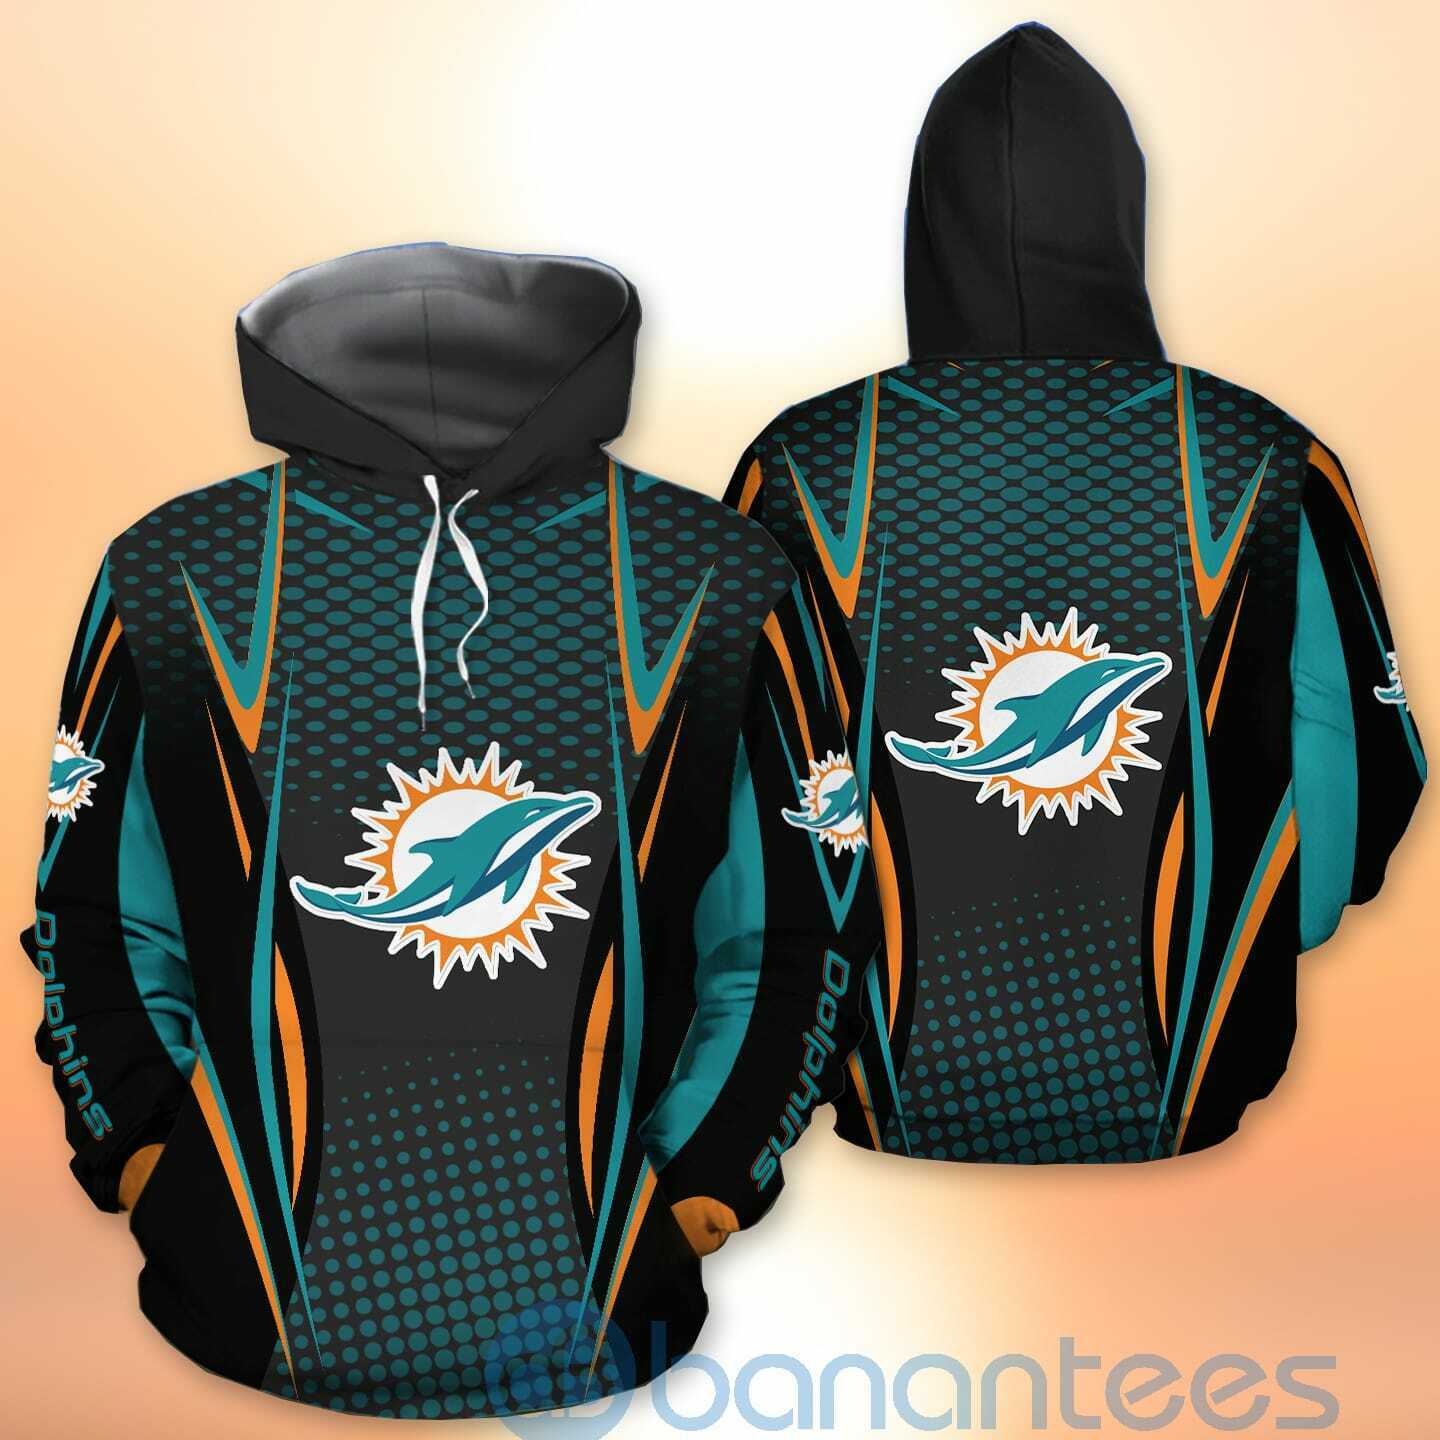 Miami Dolphins NFL American Football Sporty Design 3D All Over Printed Shirt